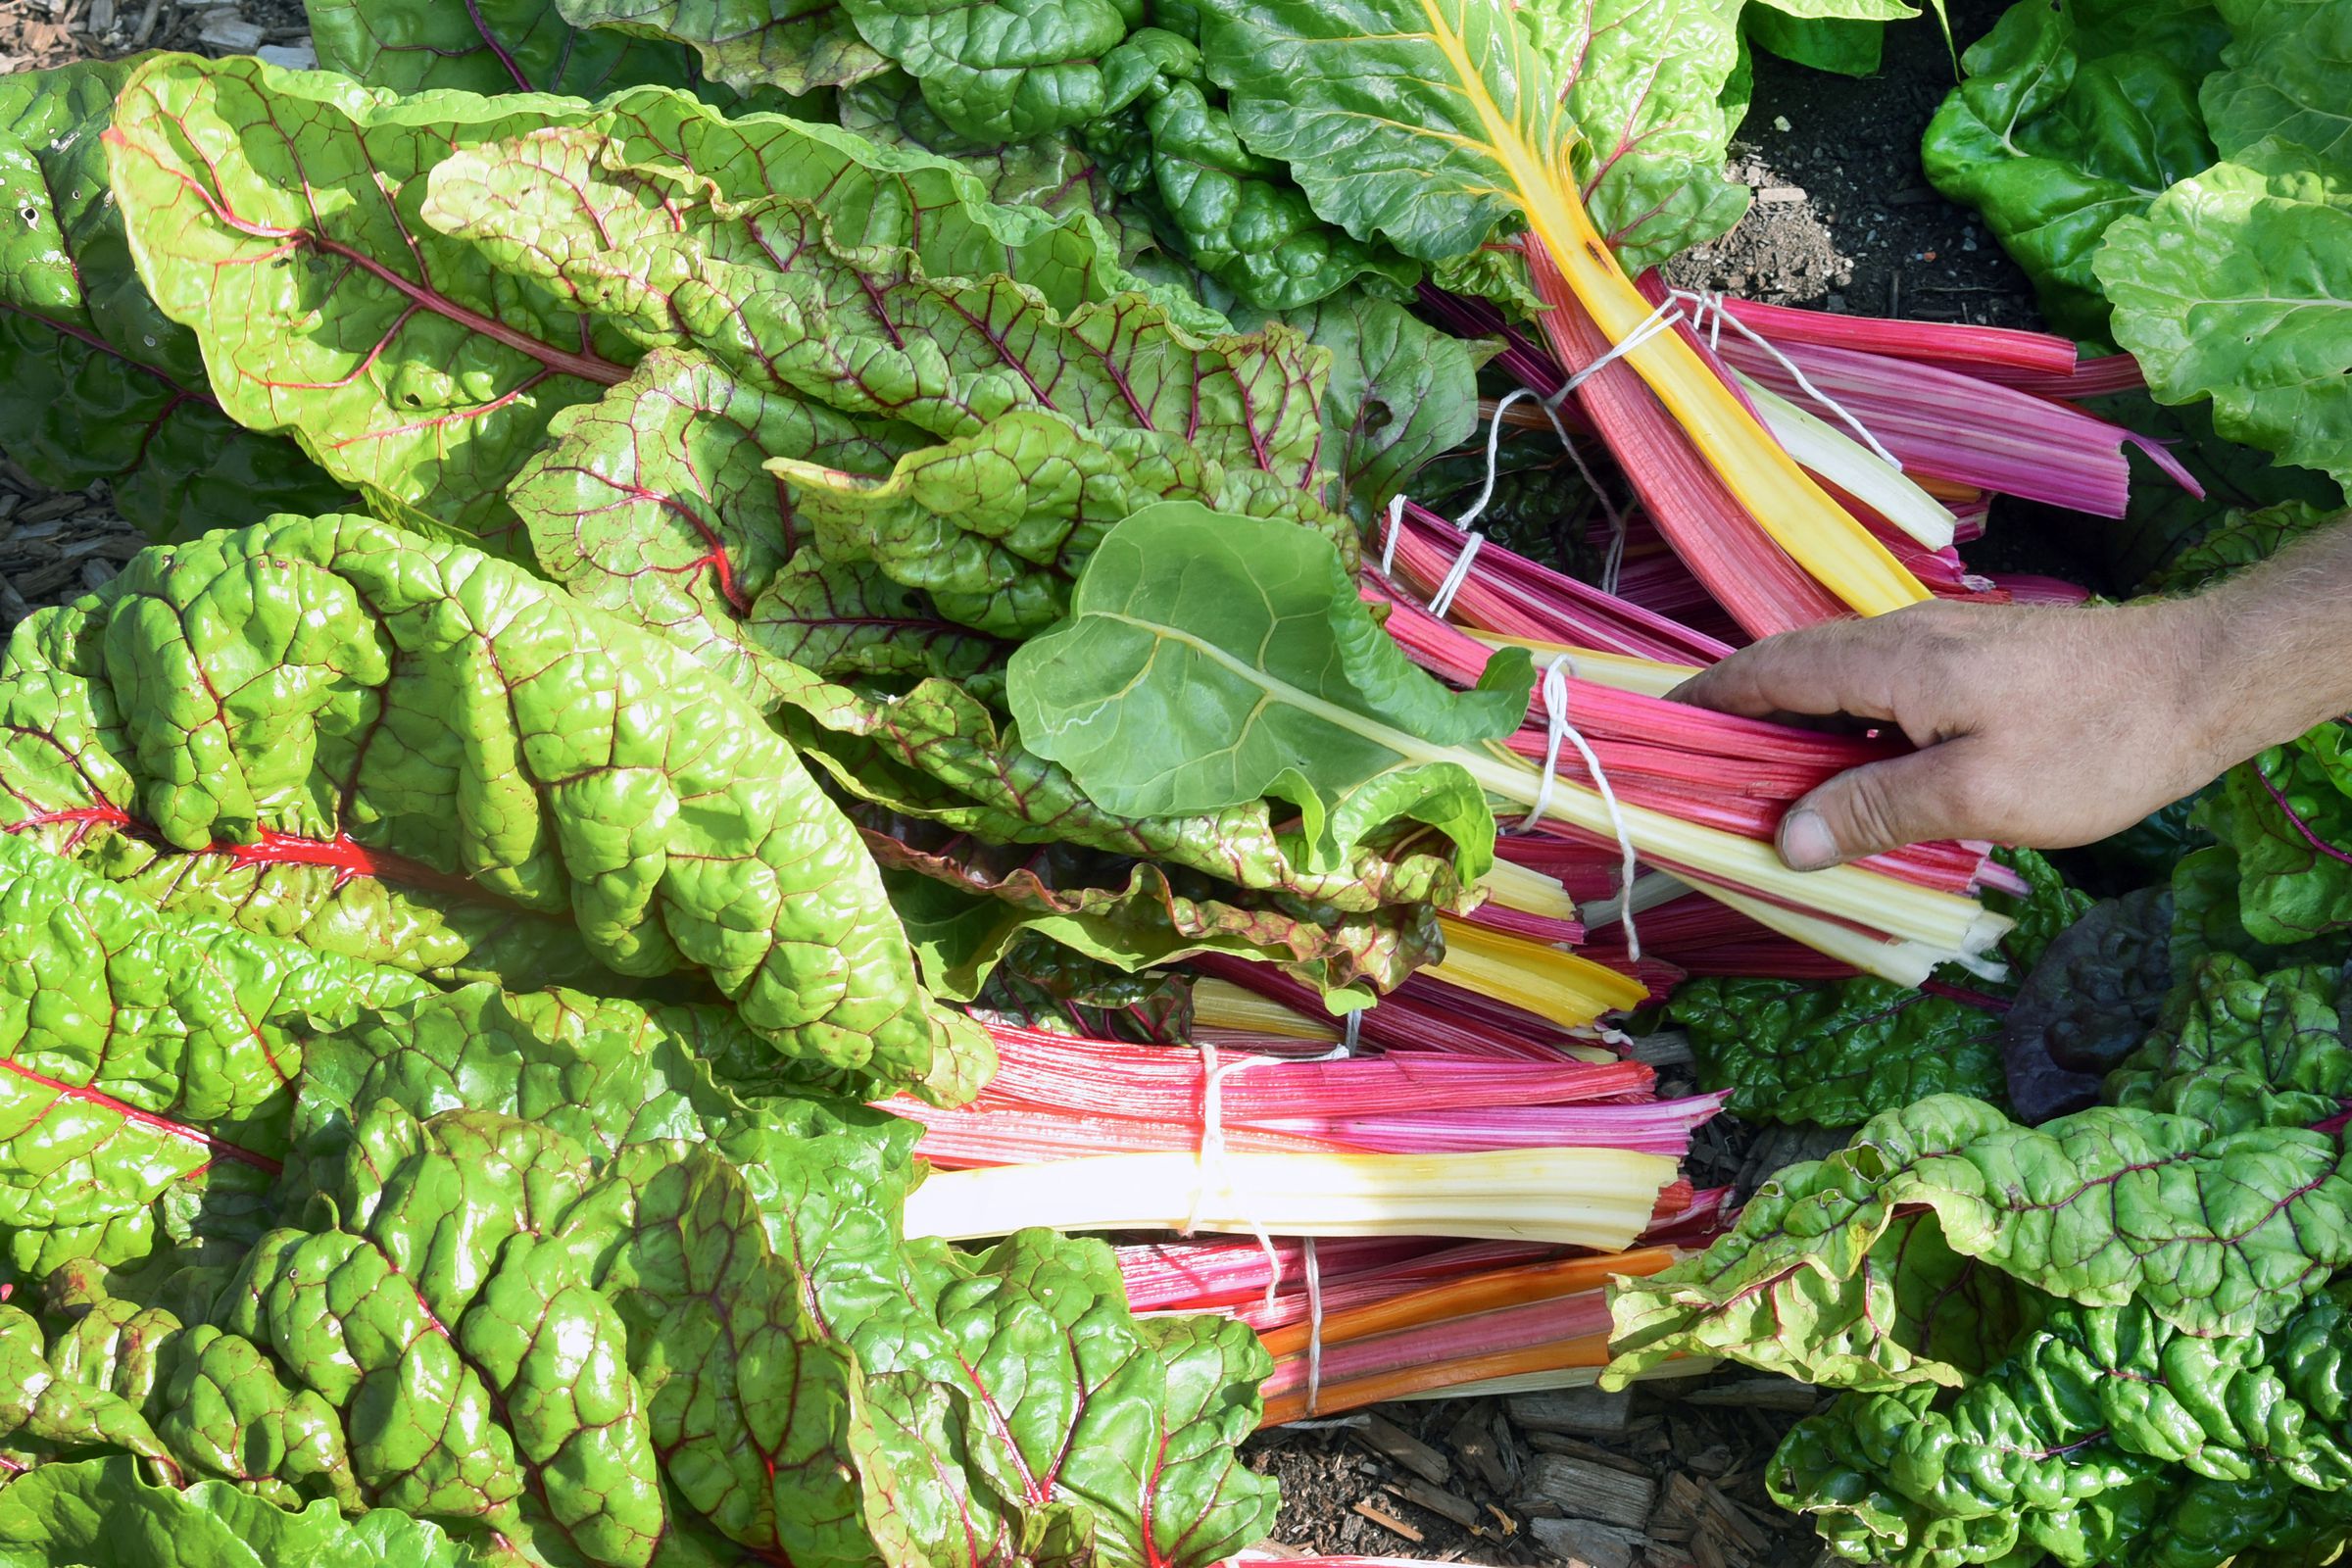 A hand holds one bundle of chard above a pile of more bundles.